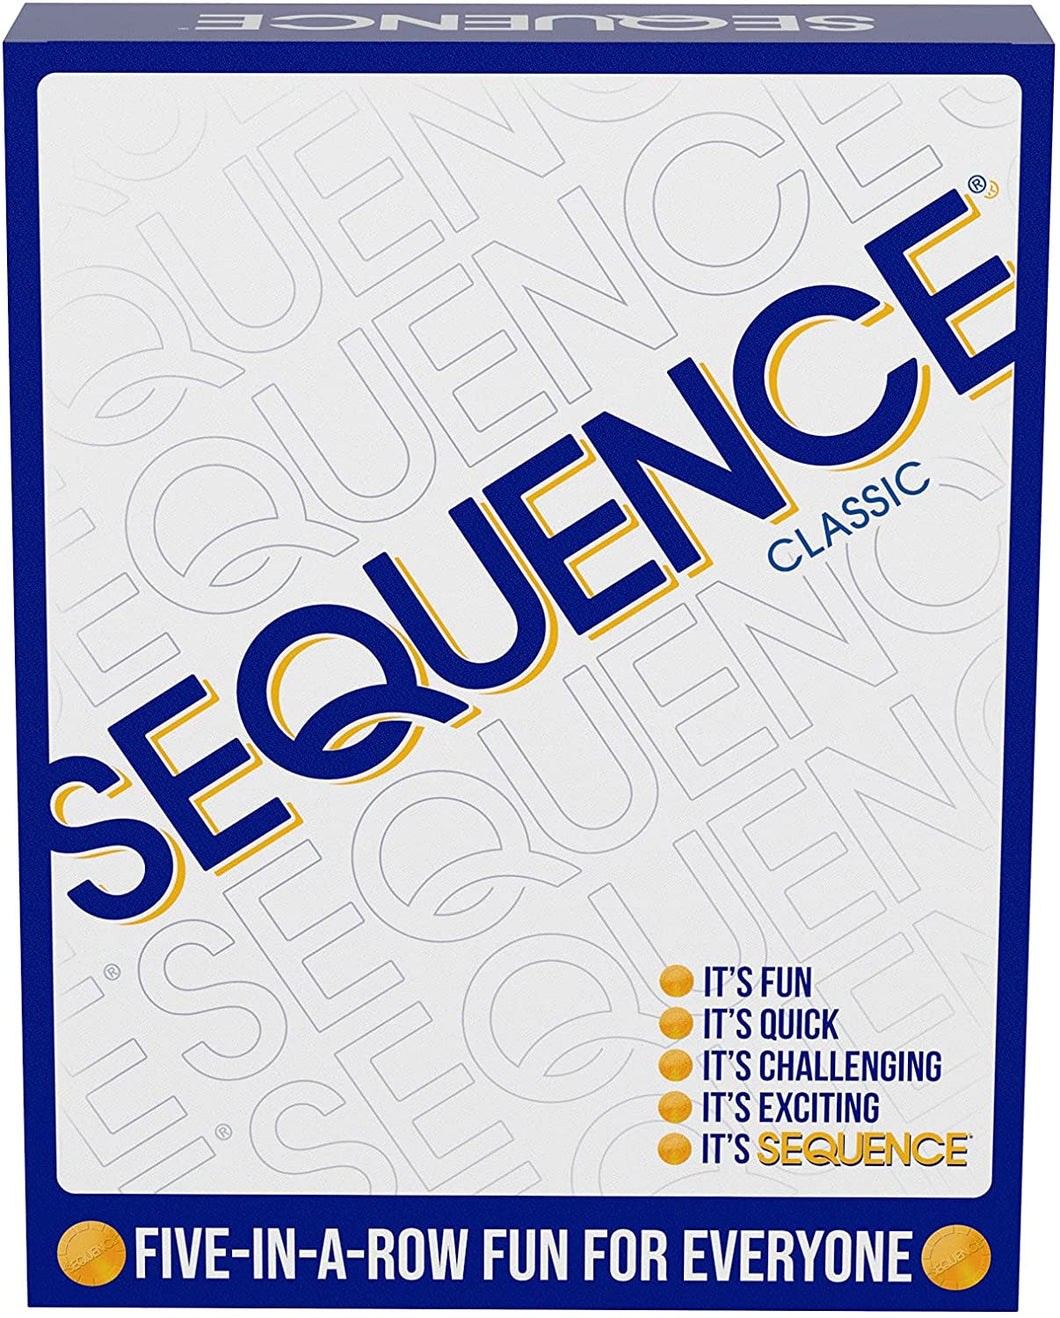 Sequence - Original Sequence Game with Folding Board, Cards and Chips